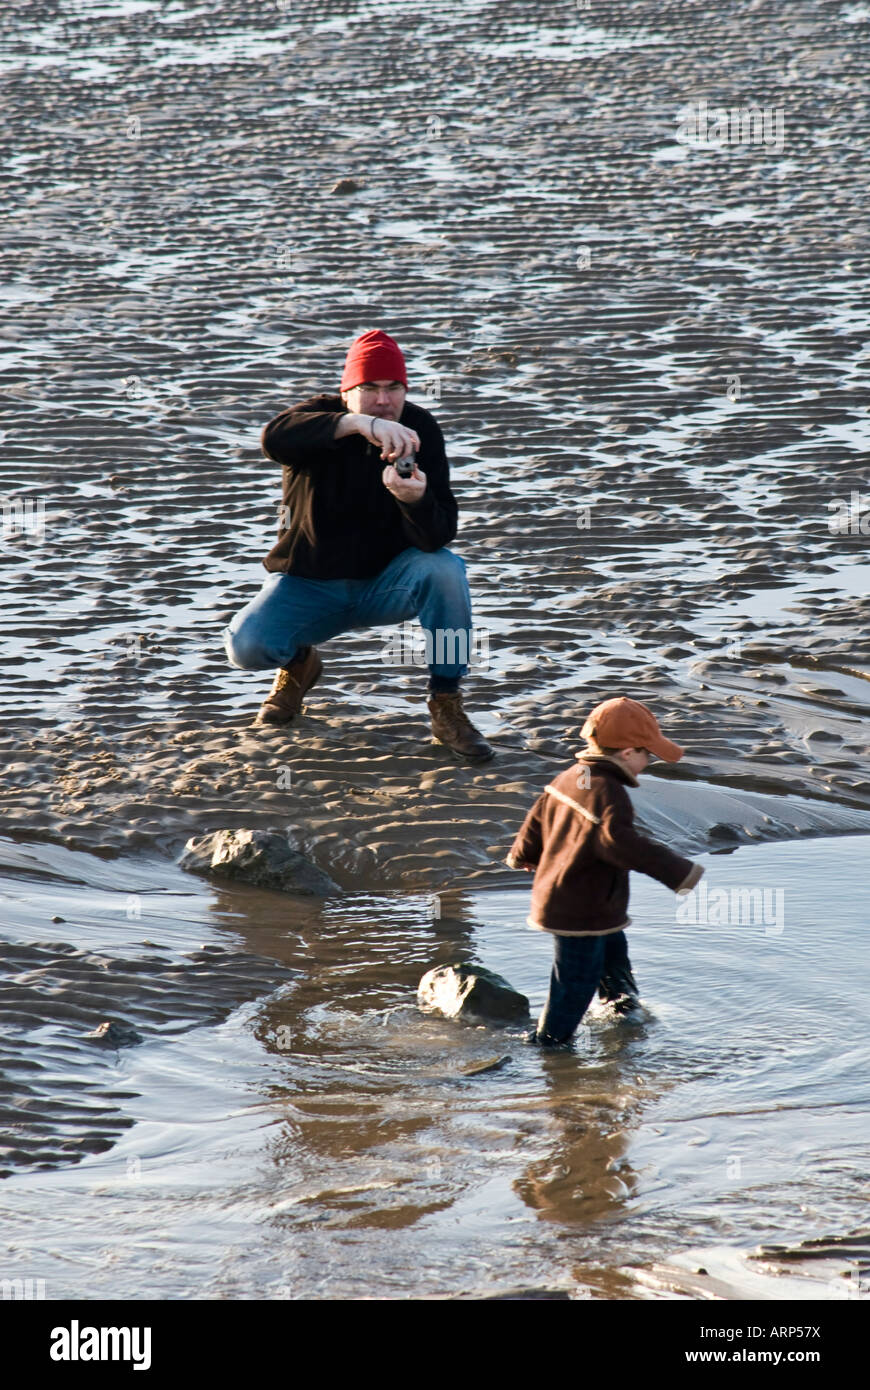 Boy child 4 5 years paddling playing sea water wet cloths seaside sea water outdoors day people winter scene view MMC Stock Photo